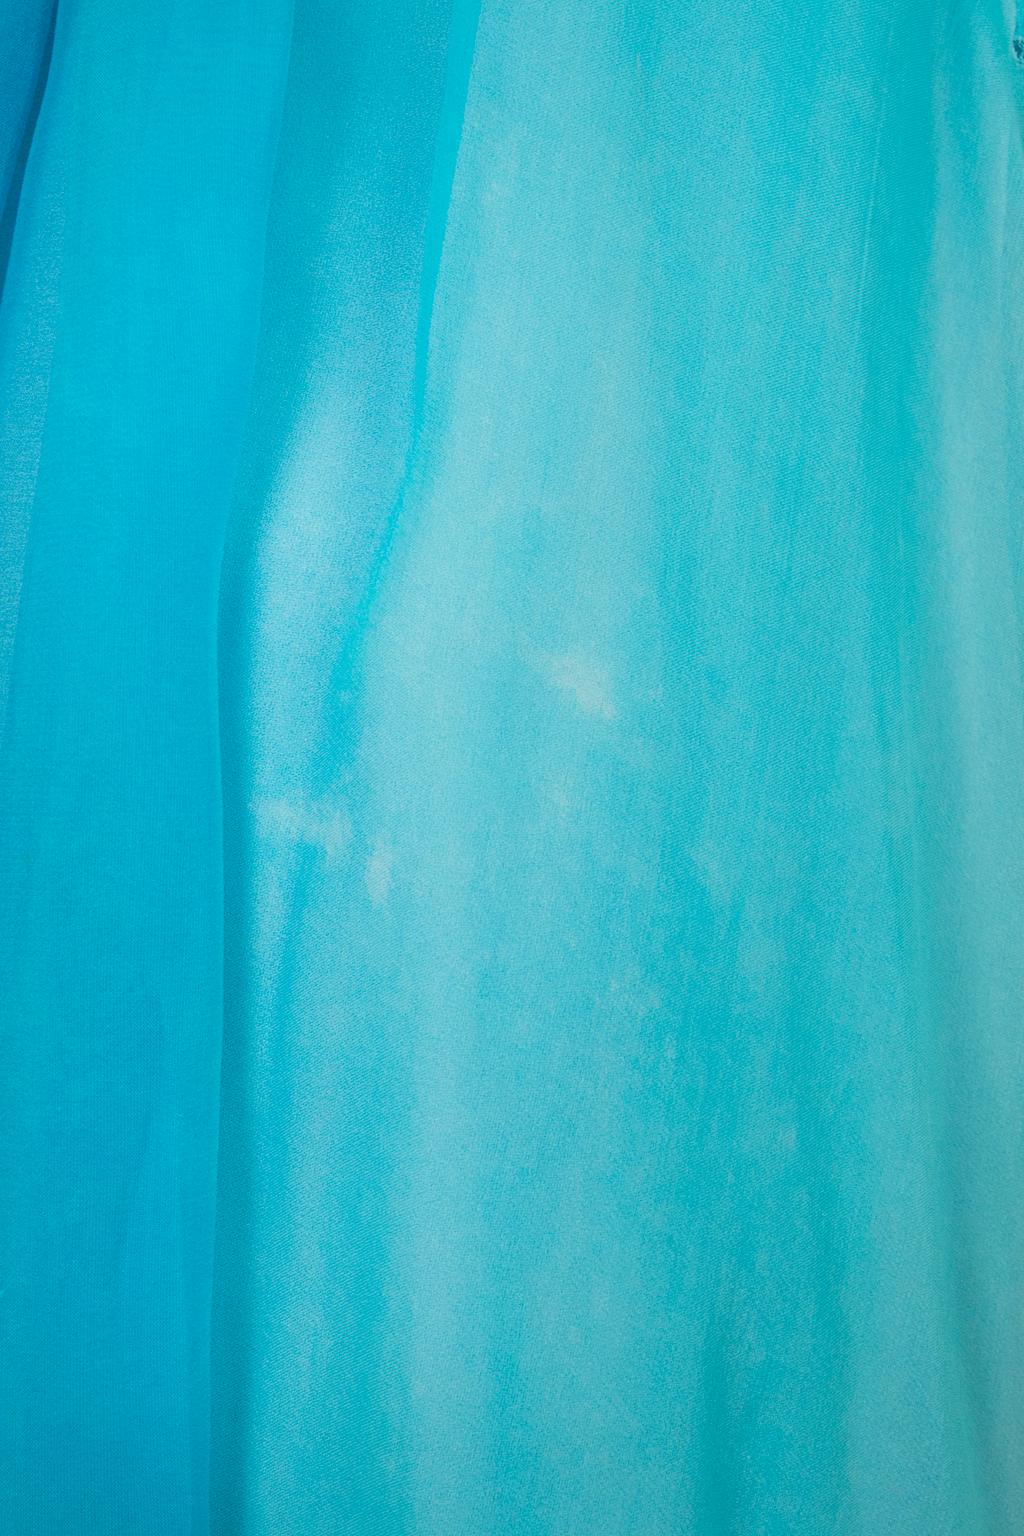 Aqua Ombré Tie Dye Chiffon Ball Gown with Ostrich Feather Trim – XS, 1960s For Sale 7